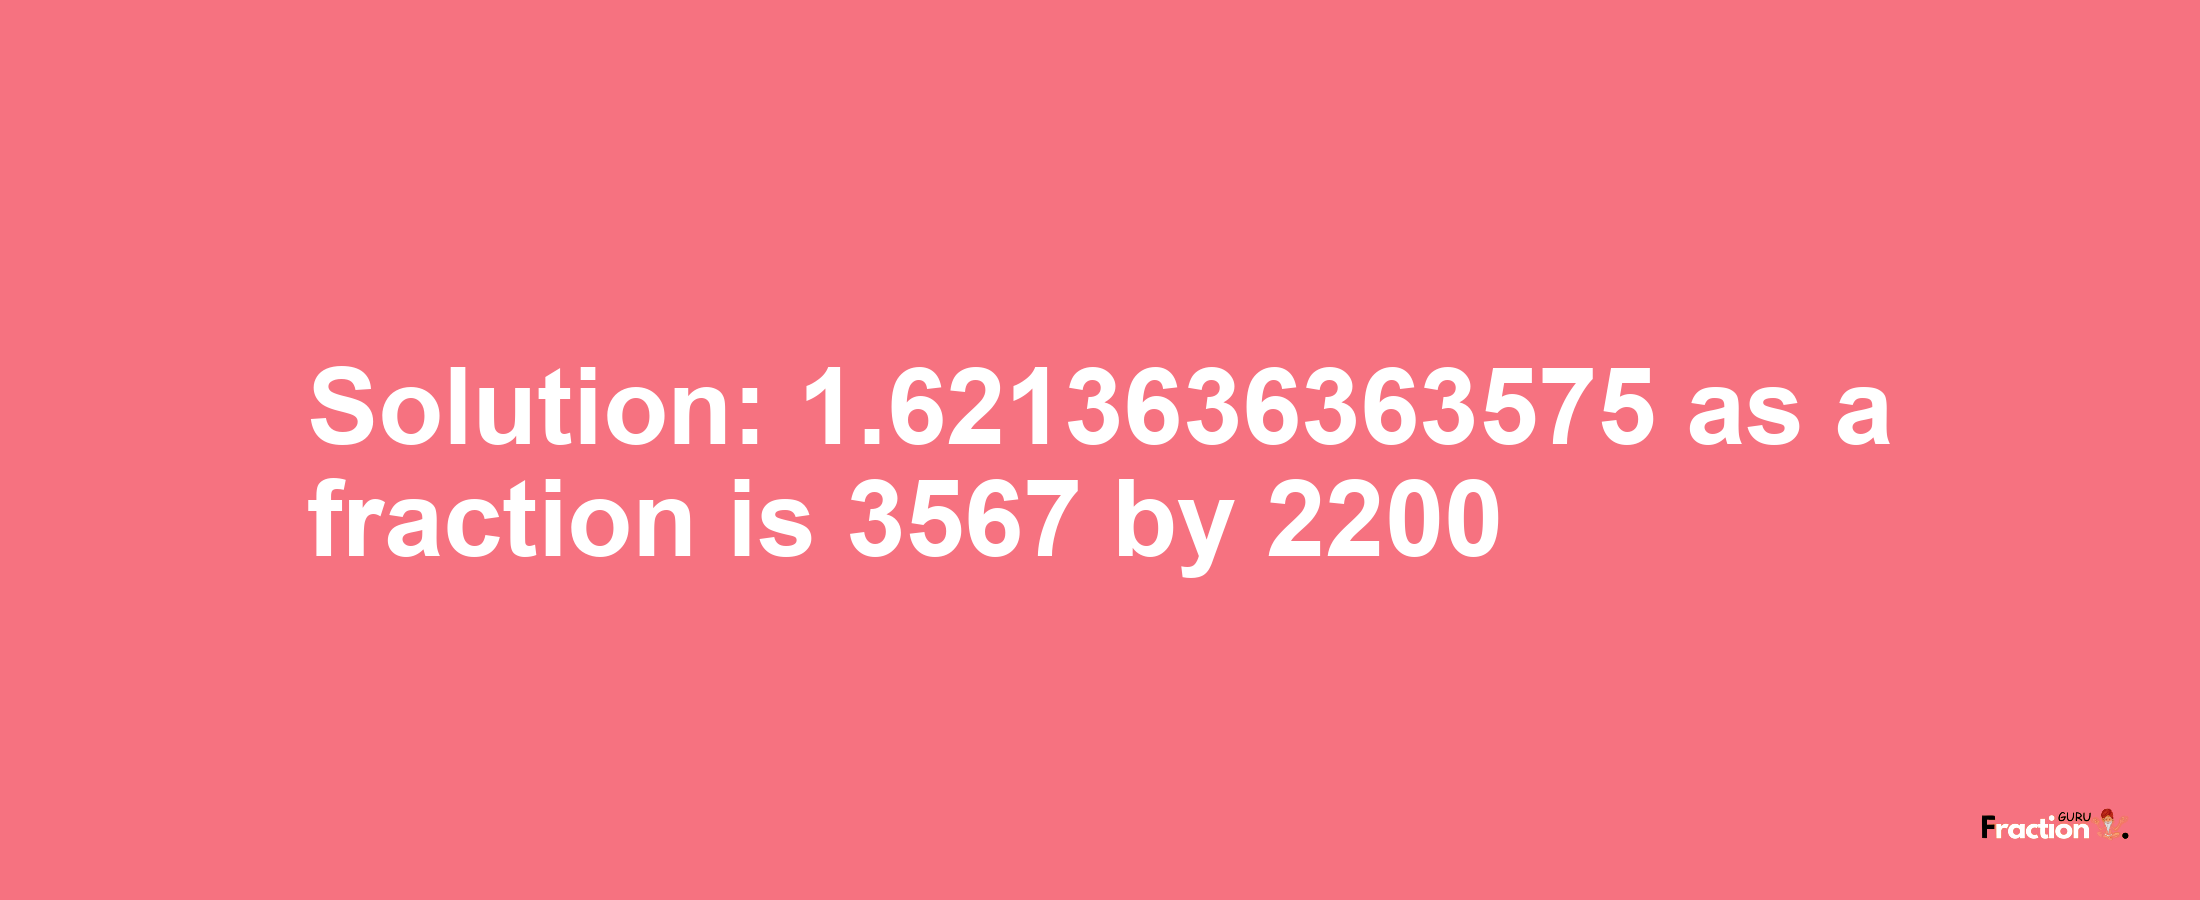 Solution:1.6213636363575 as a fraction is 3567/2200